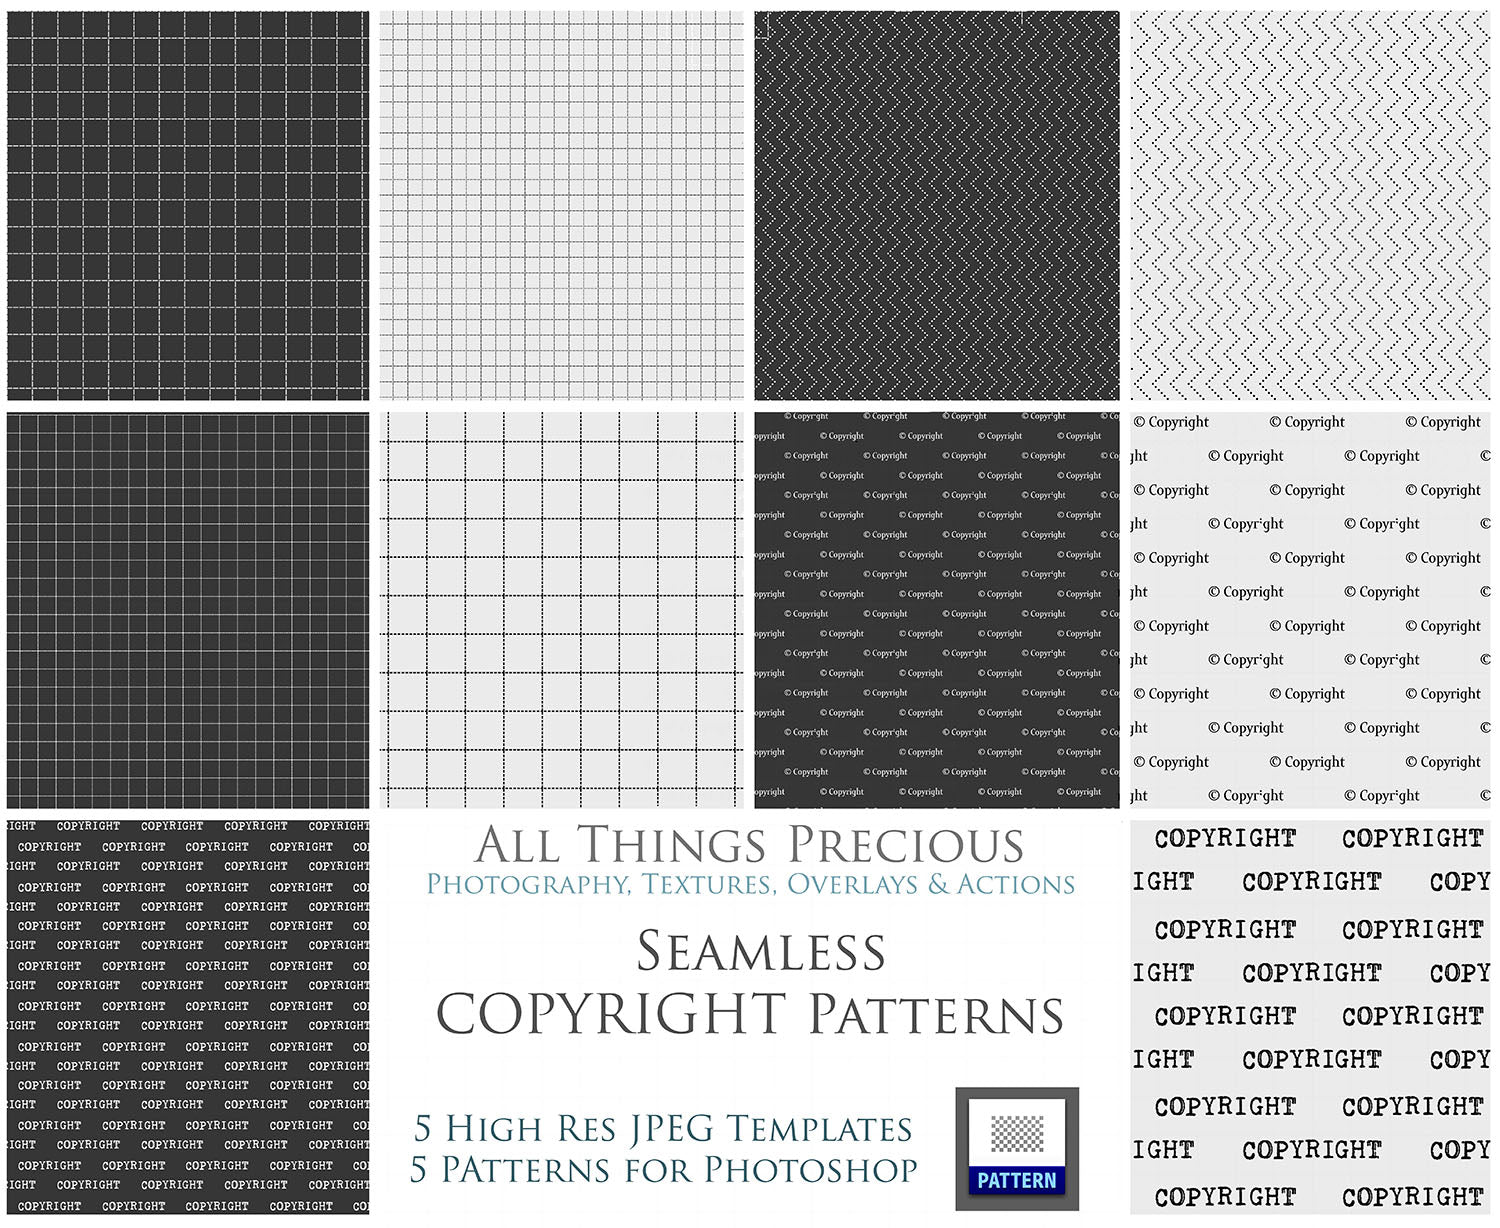 Copyright and Watermark Overlays with seamless Photoshop Patterns! A great way to protect you work.This includes transparent PNG pattern Overlays for photographers and graphic Artists. Digital assets for photography. ATP Textures